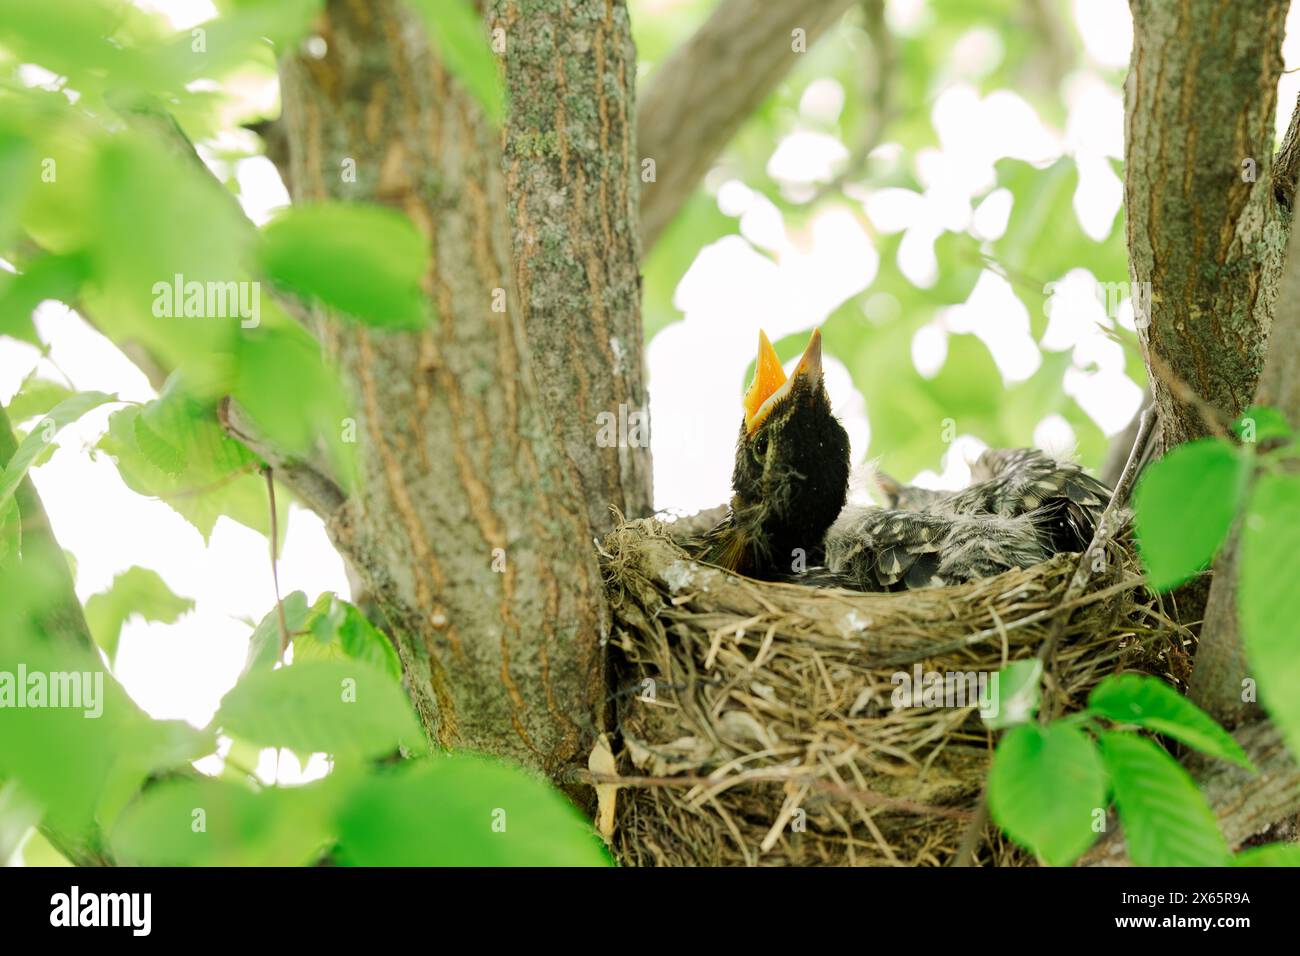 Young bird in nest opening beak among leafy tree branches Stock Photo